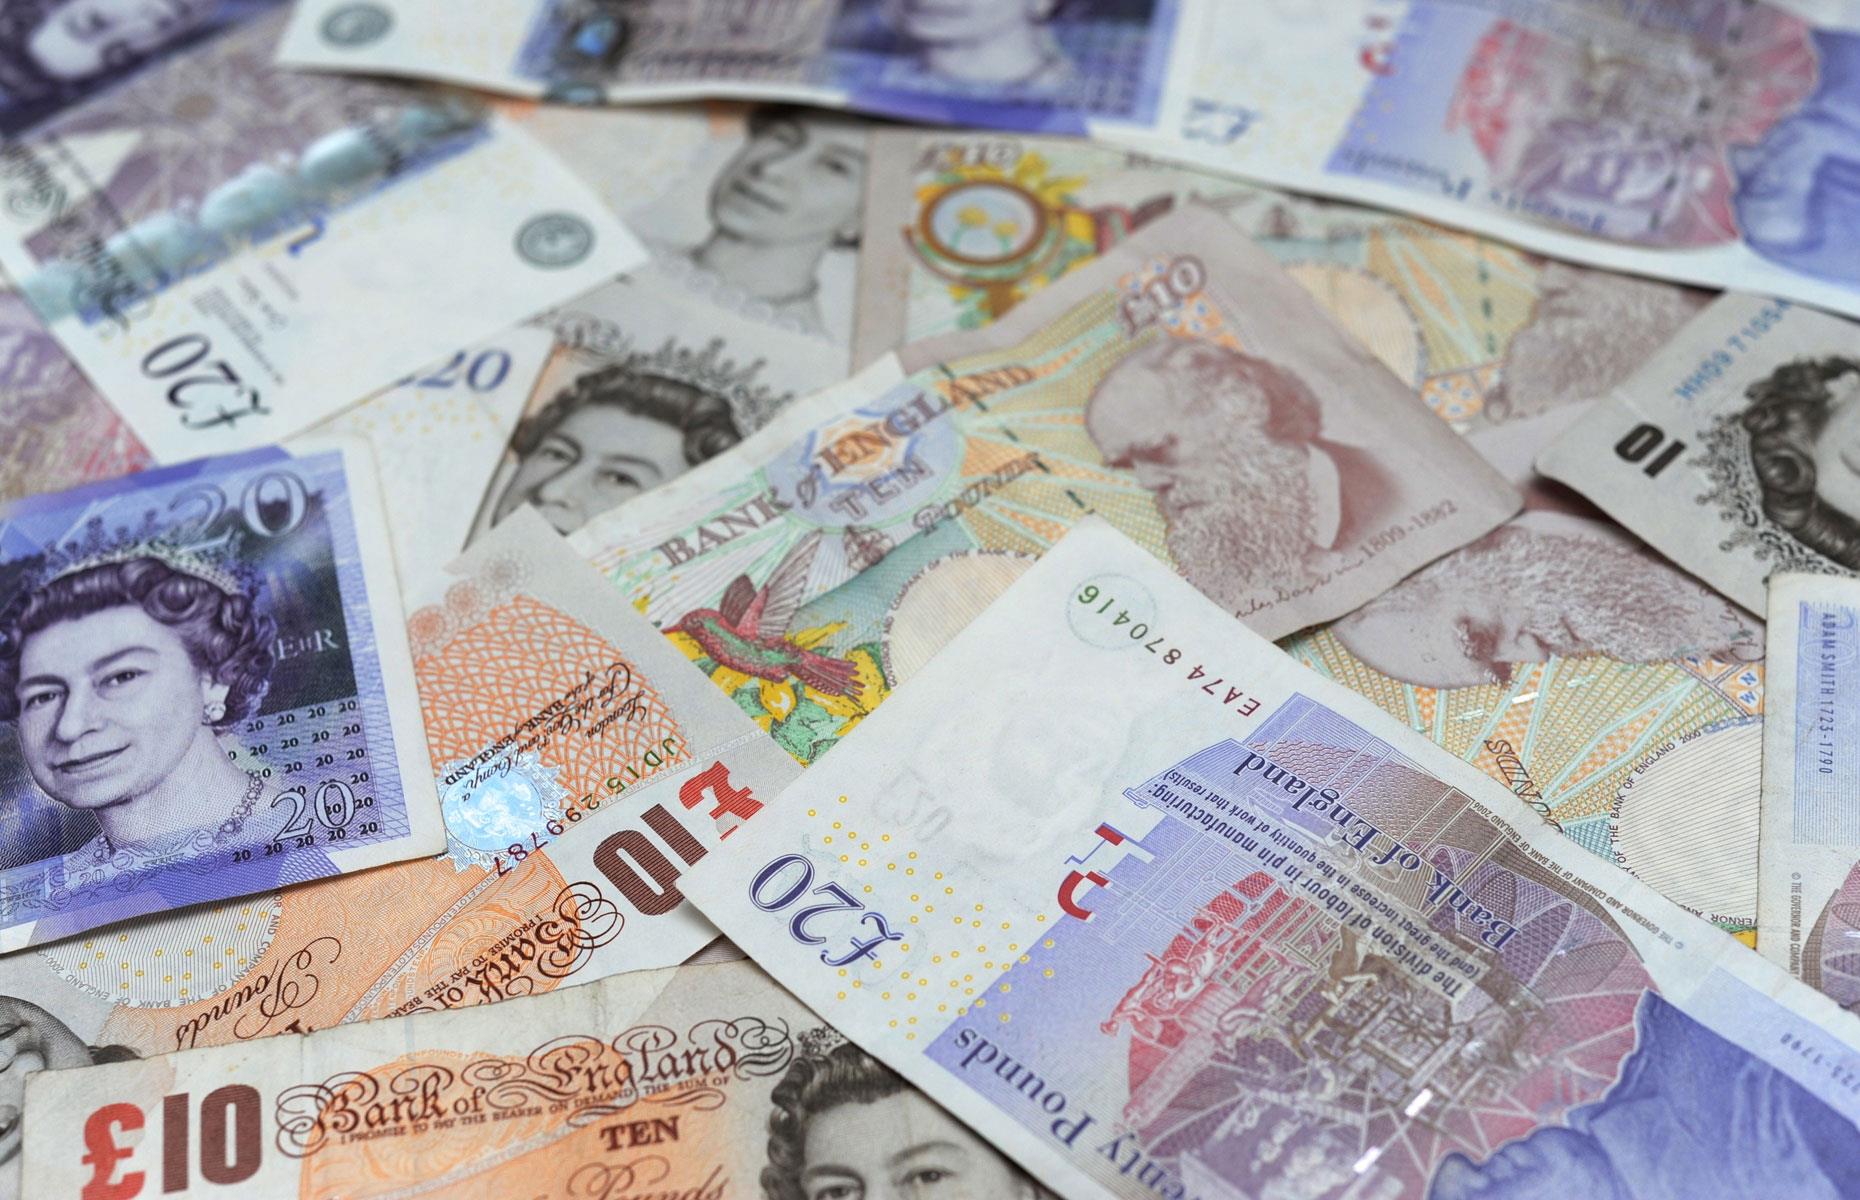 One in seven English banknotes contain faecal matter